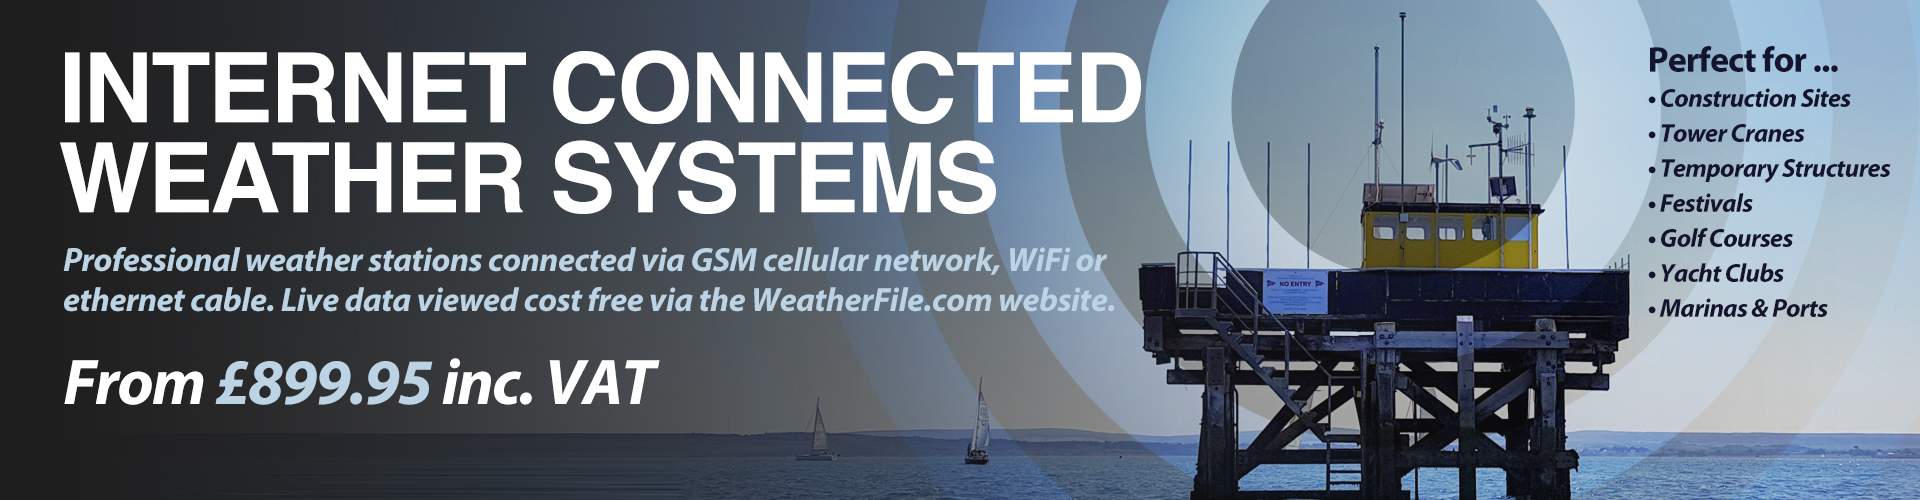 Internet Connected Weather Systems